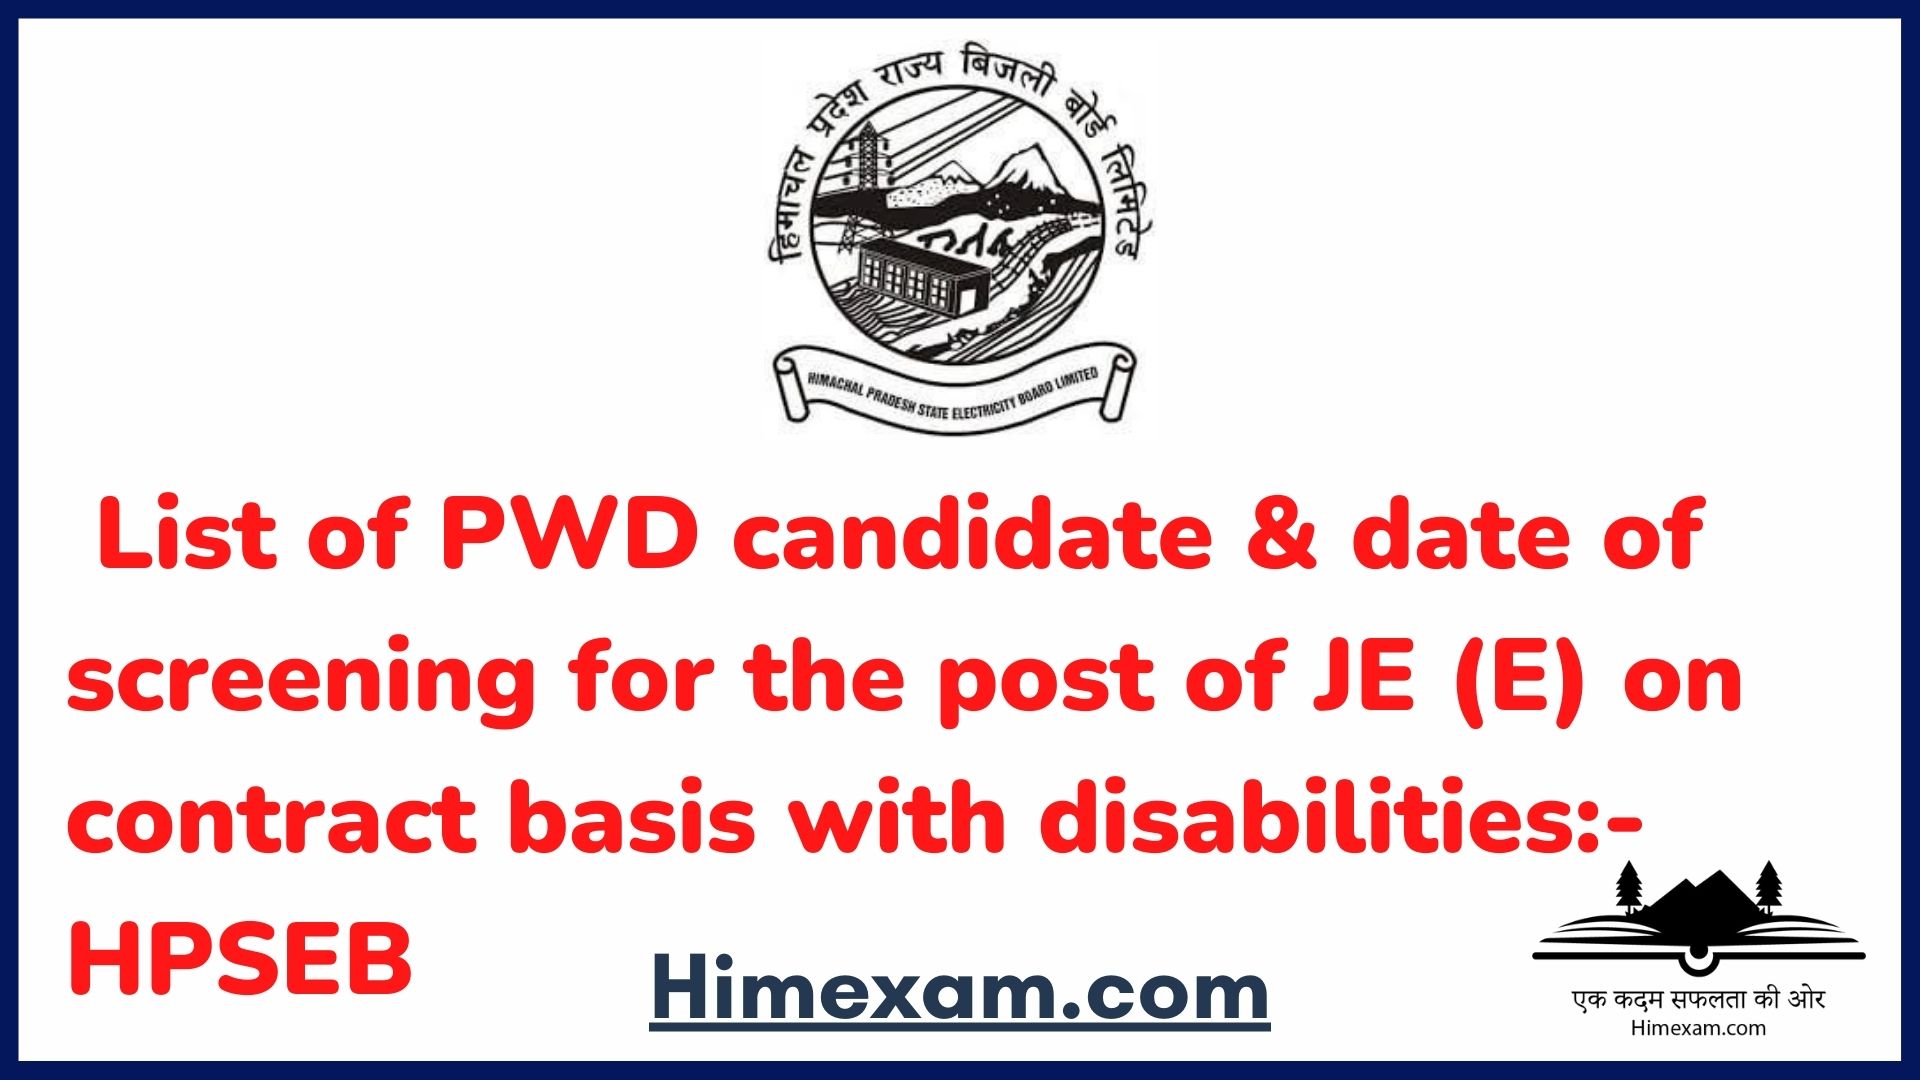 List of PWD candidate & date of screening for the post of JE (E) on contract basis with disabilities:- HPSEB